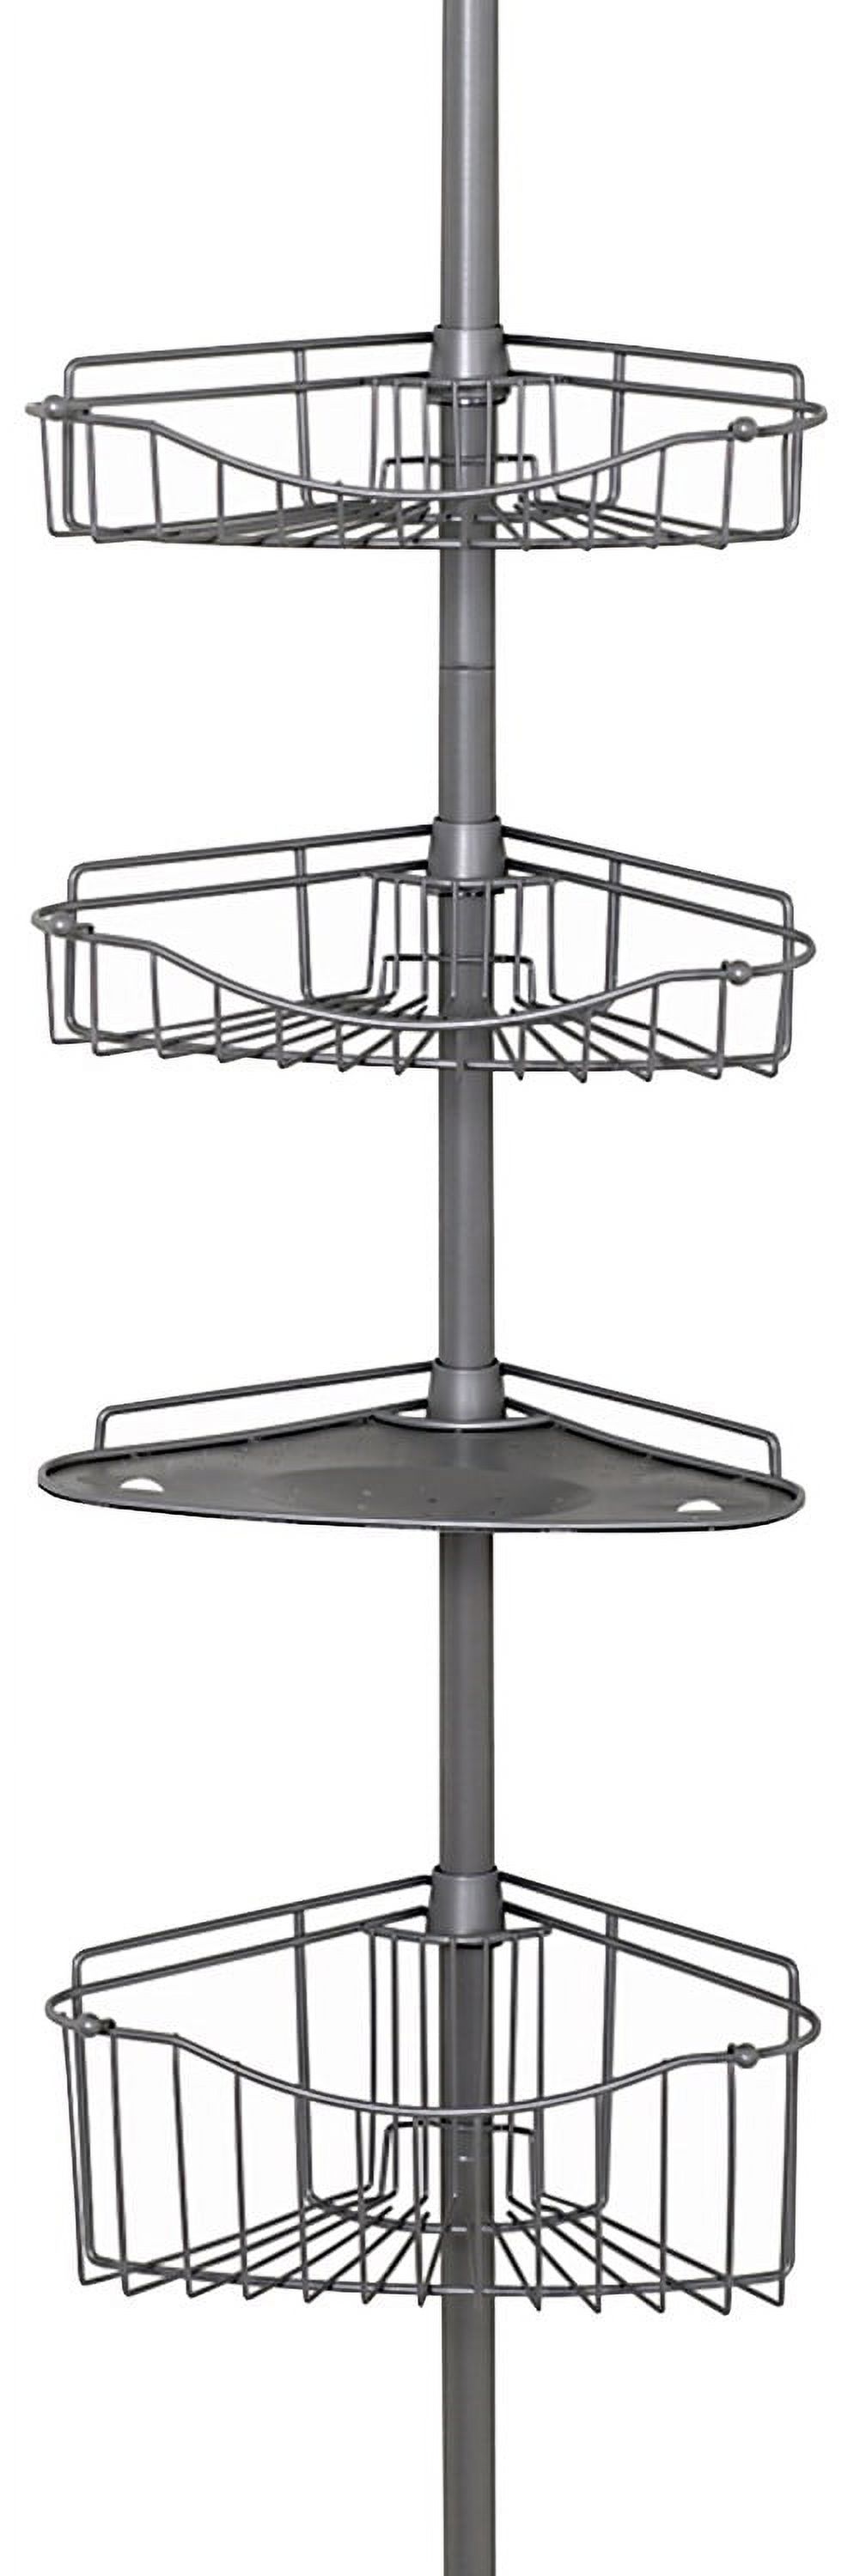 Satin Nickel Shower Caddy, Zenna Home Tension Pole - image 2 of 2